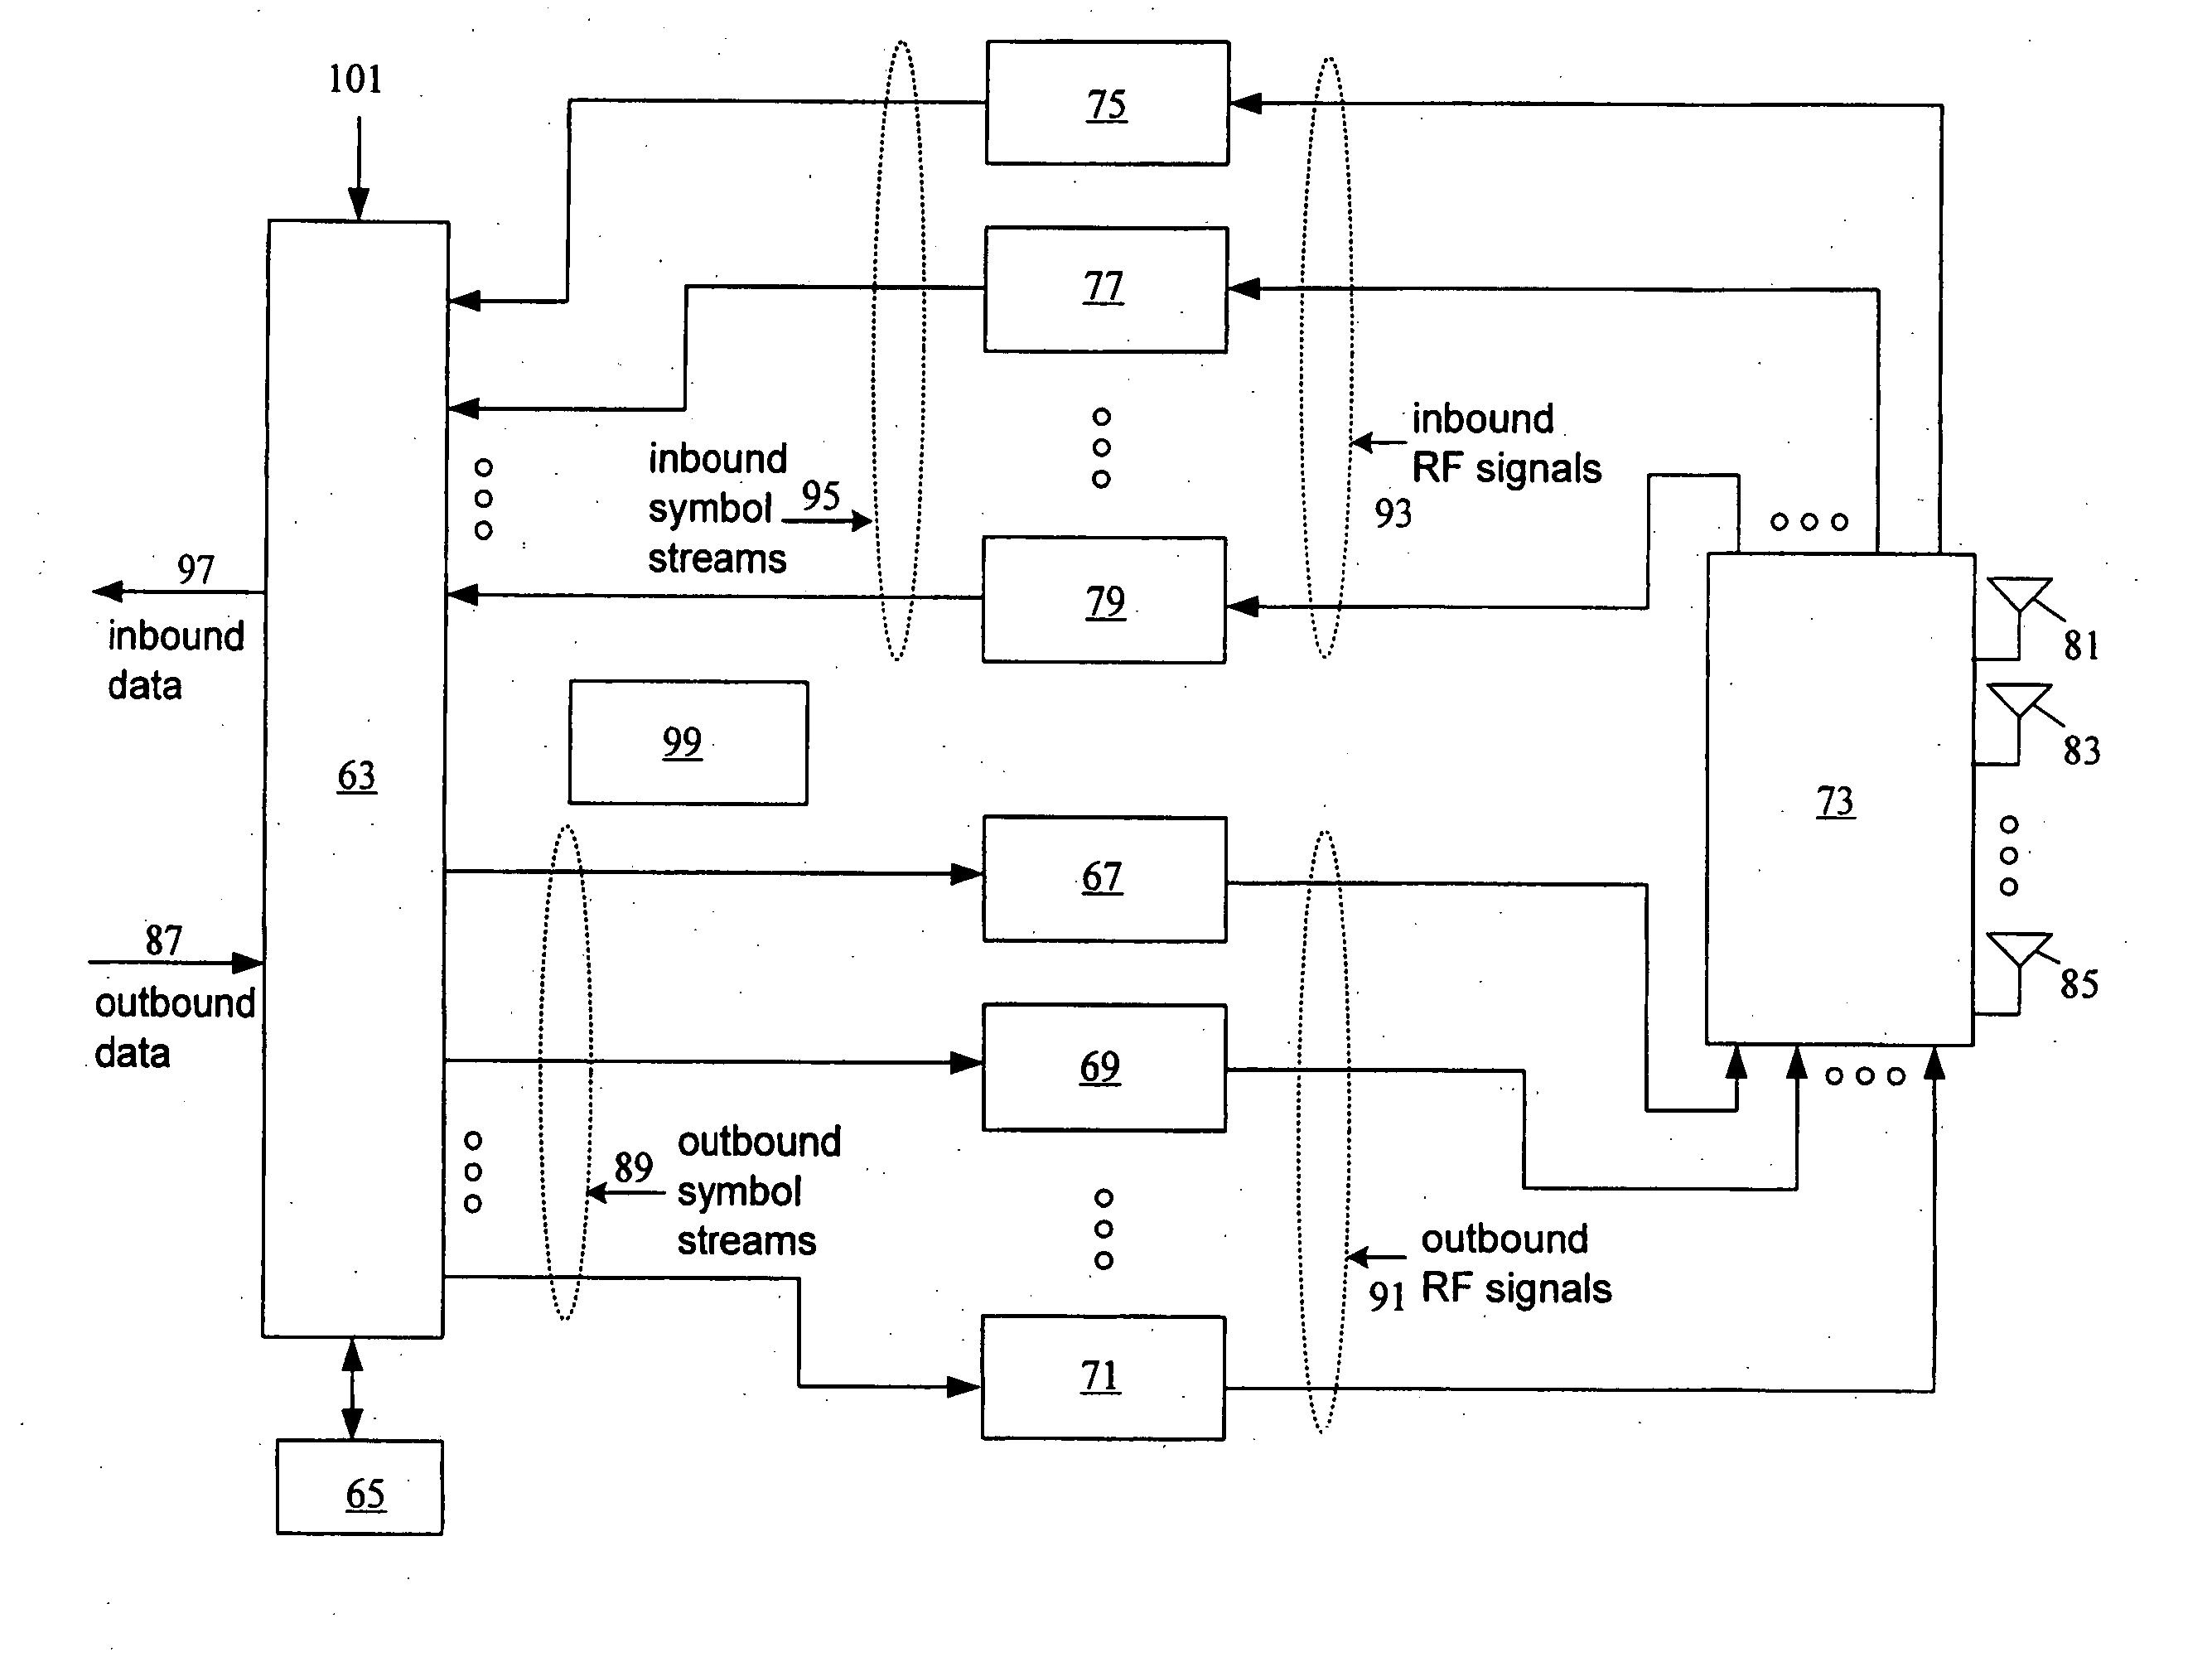 Multiple streams using partial STBC with SDM within a wireless local area network